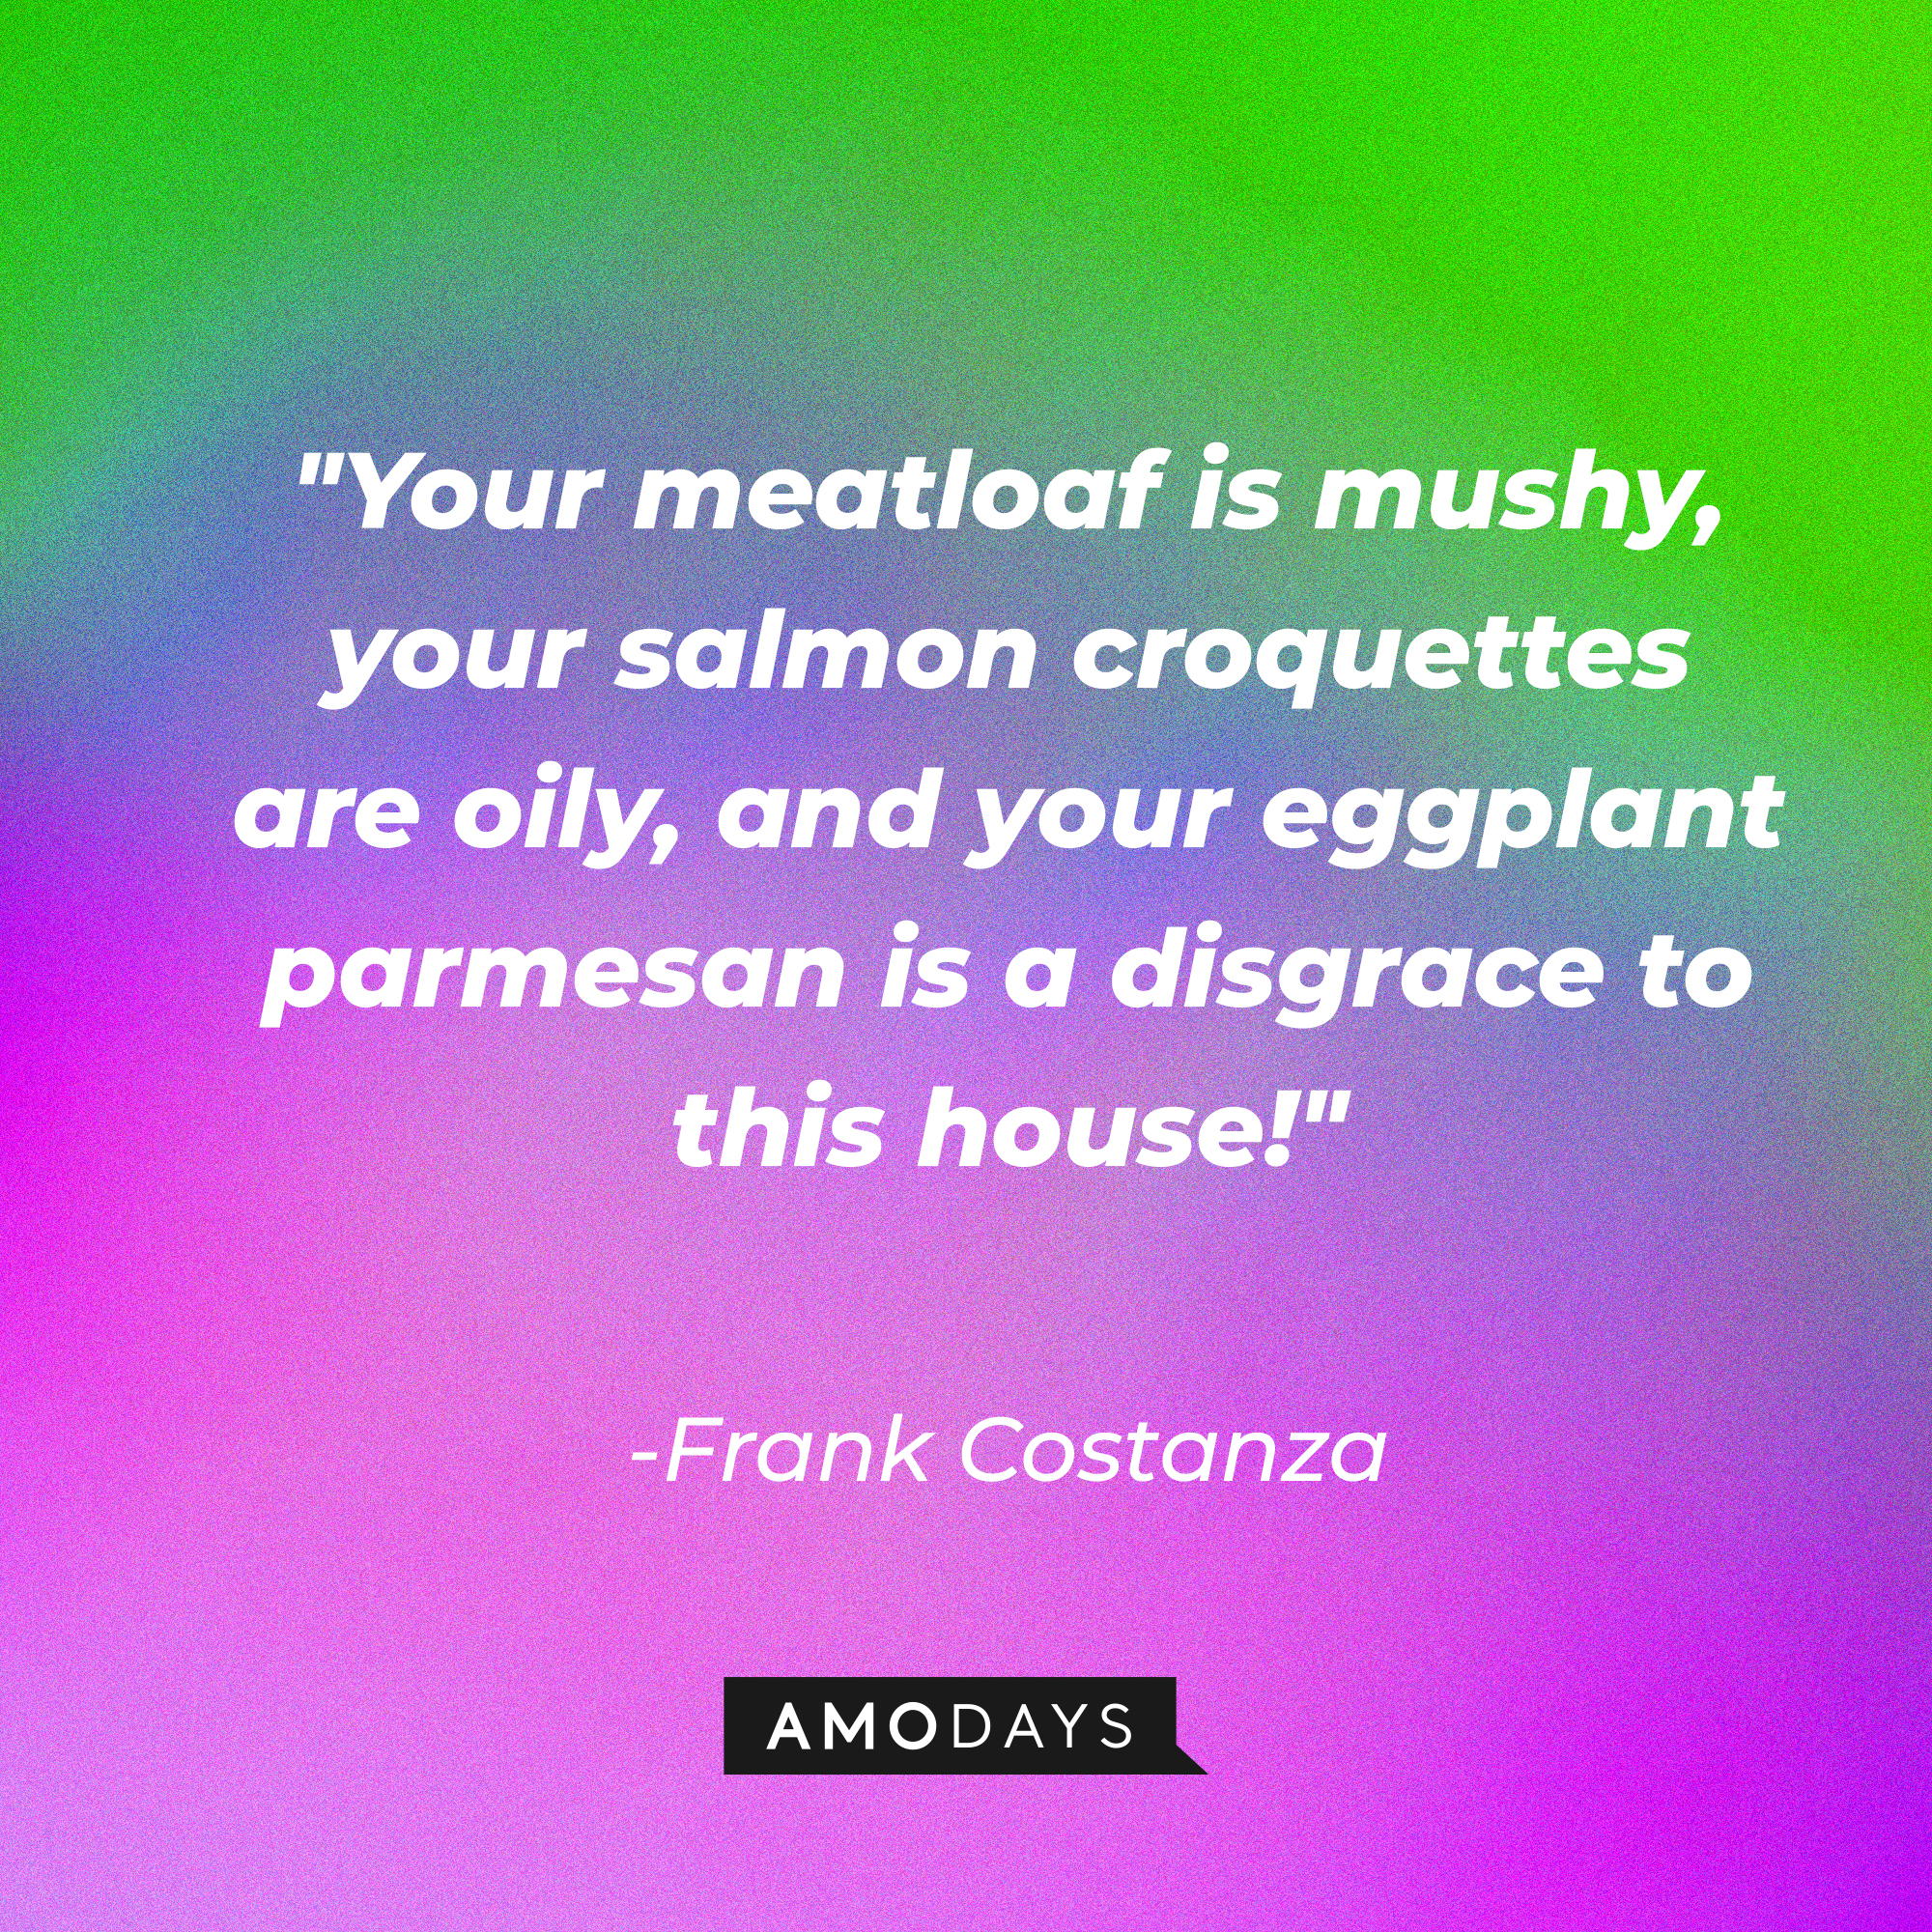 A photo of Frank Costanza's quote, "Your meatloaf is mushy, your salmon croquettes are oily, and your eggplant parmesan is a disgrace to this house!" | Source: Amodays